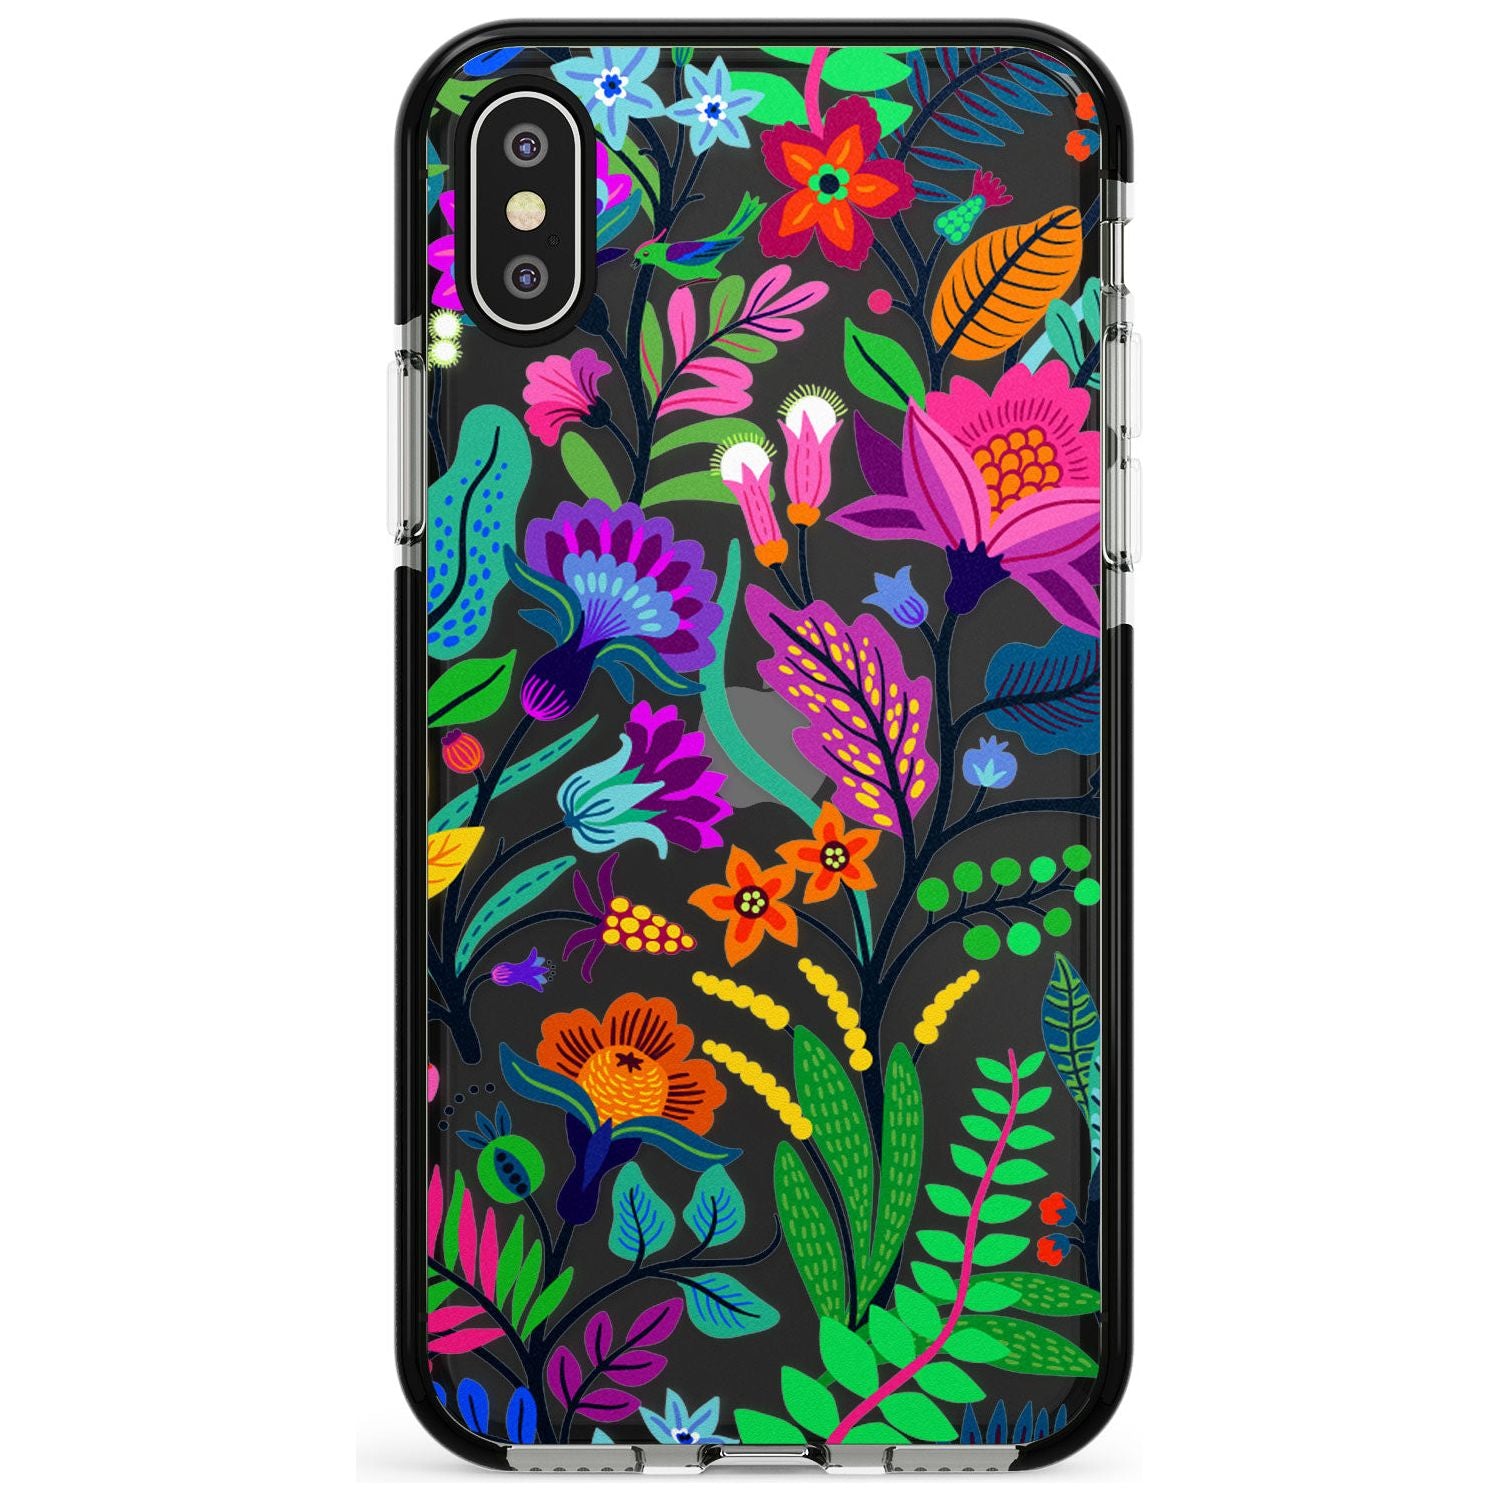 Floral Vibe Black Impact Phone Case for iPhone X XS Max XR